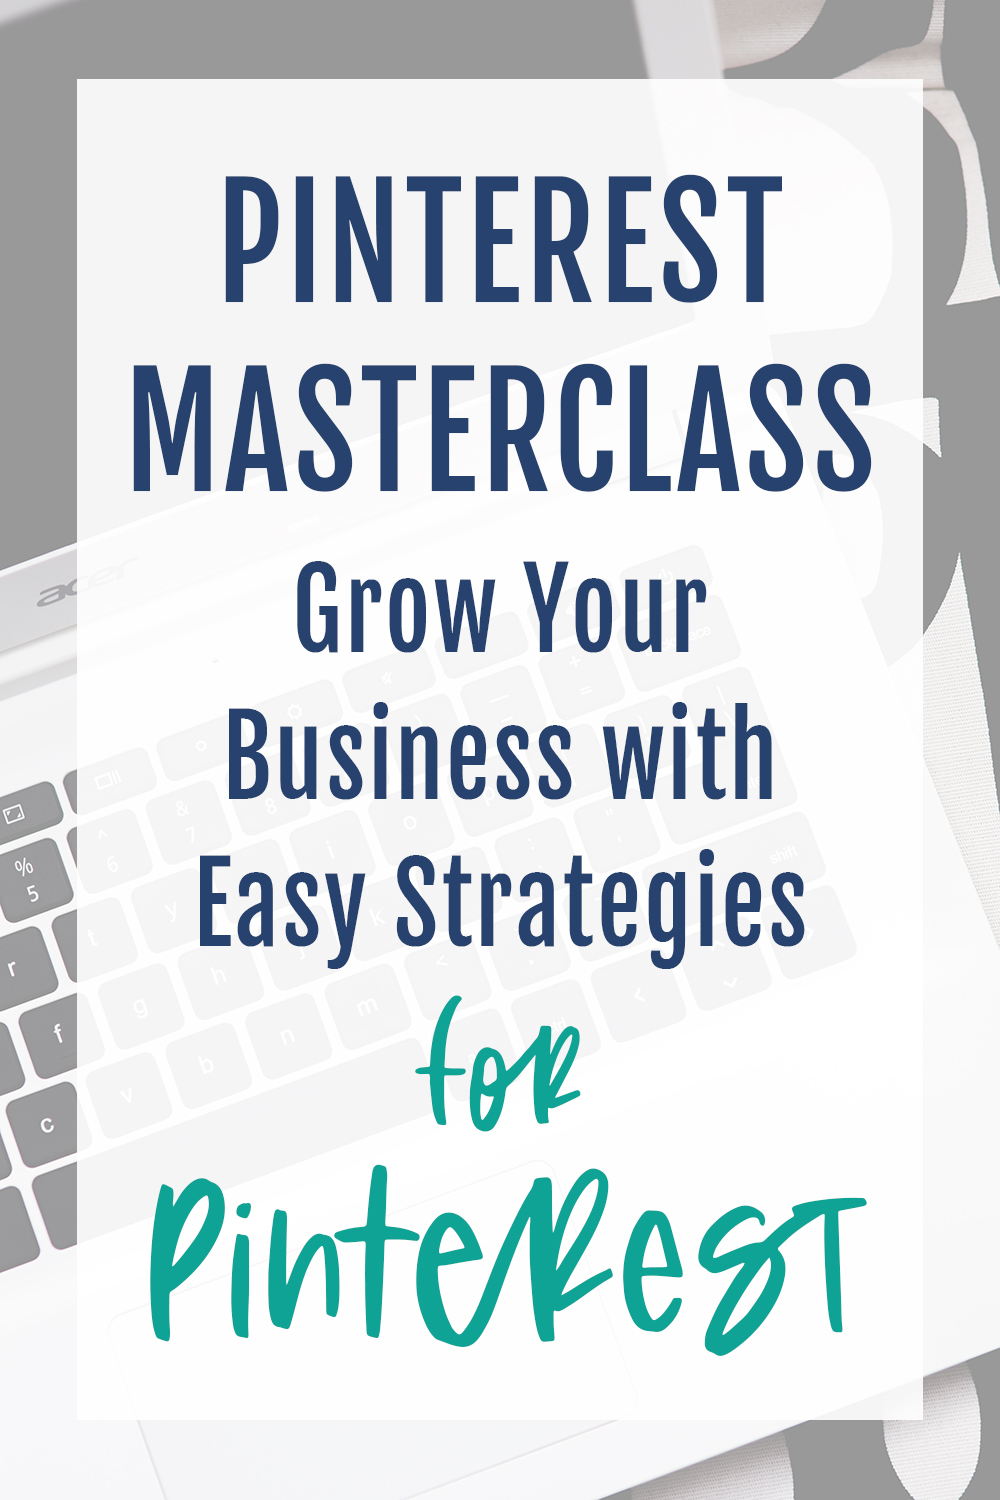 Pinterest Masterclass: Grow Your Business with Easy Strategies for Pinterest!